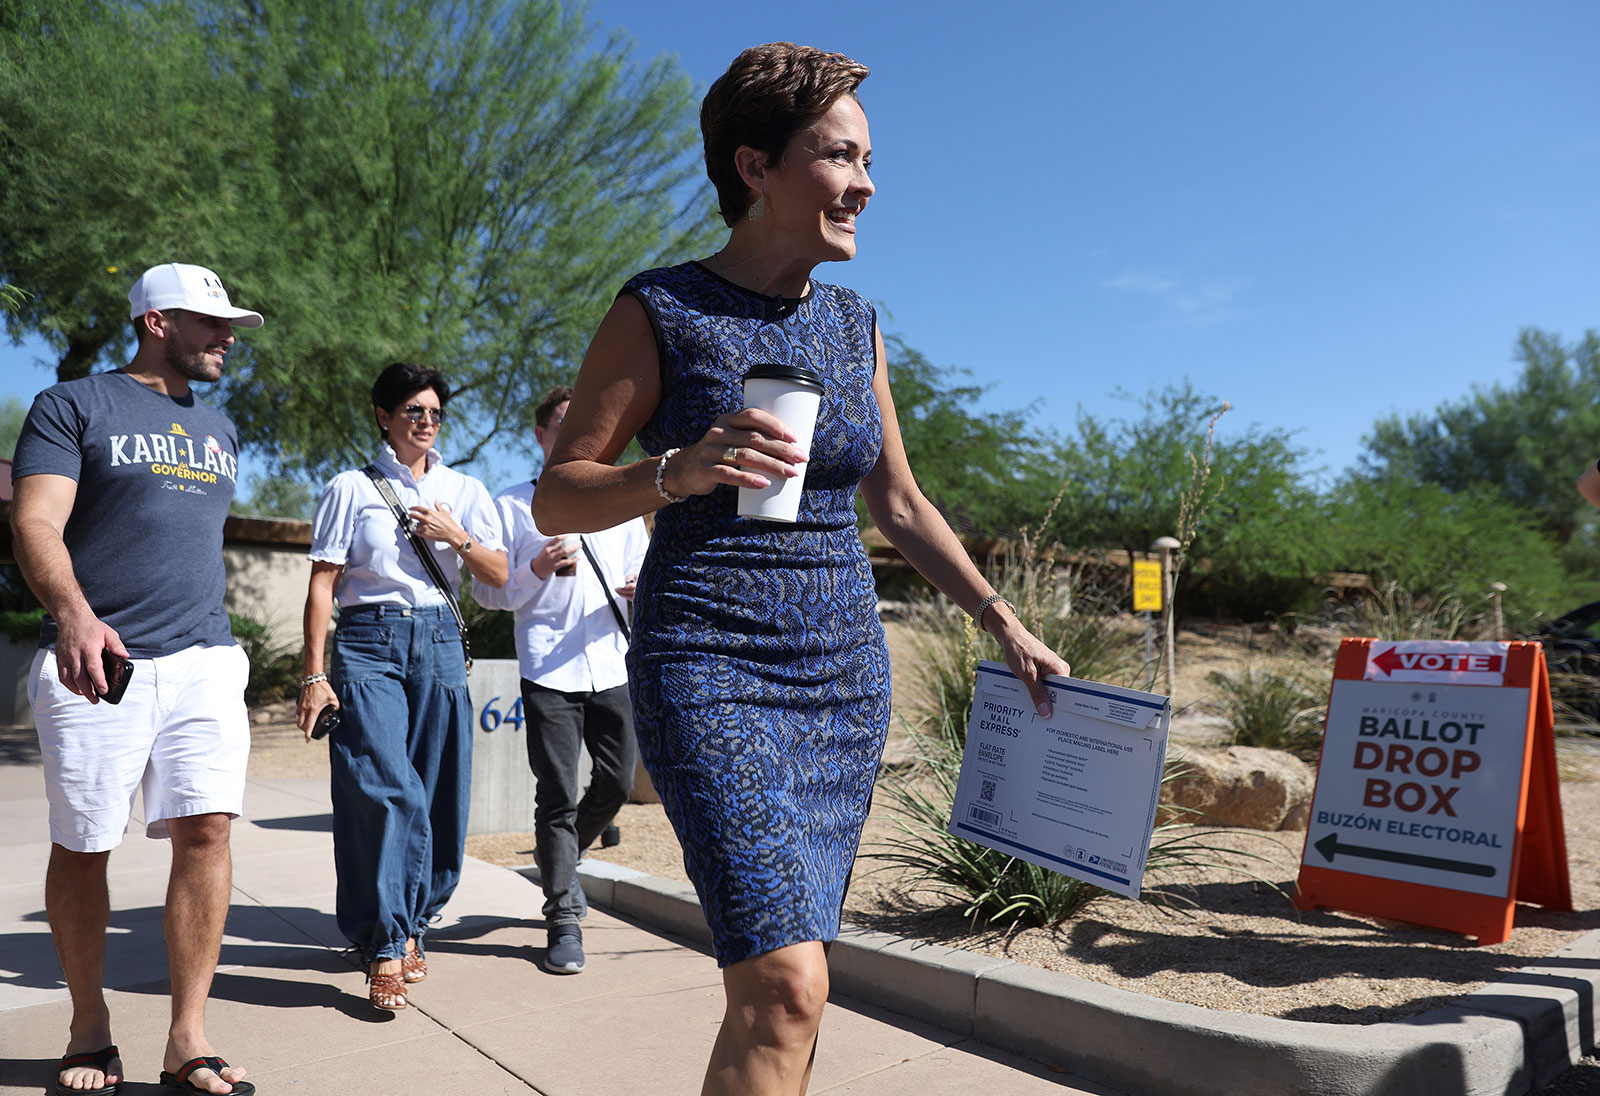 Republican candidate for Arizona governor Kari Lake leaves a polling place after voting in the Arizona primary on Tuesday in Paradise Valley, Arizona.